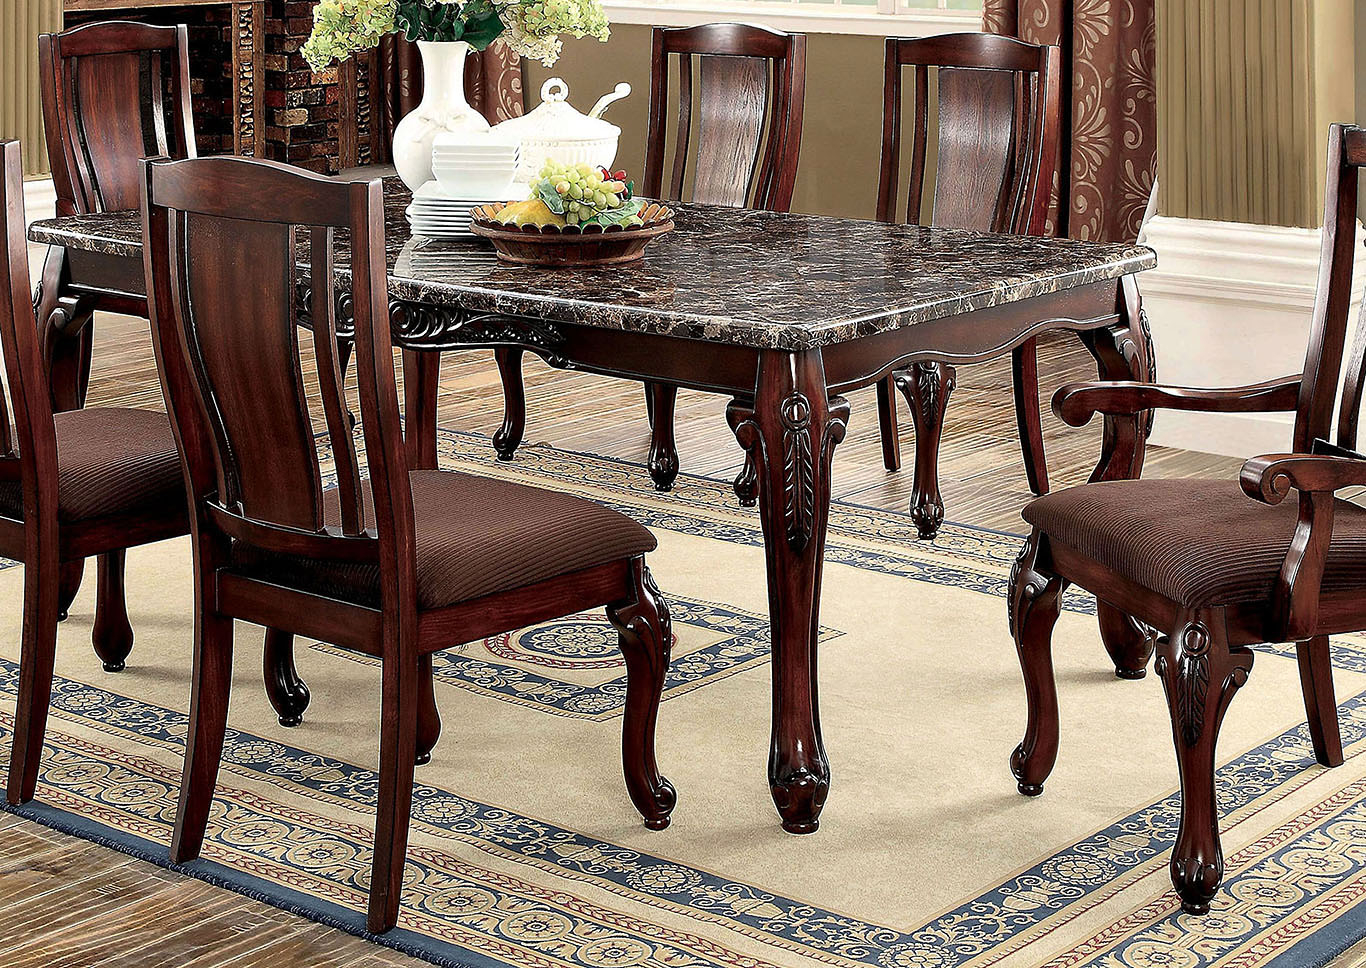 Flamingo Furniture Johannesburg I Brown Cherry Dining Table inside sizing 1366 X 968